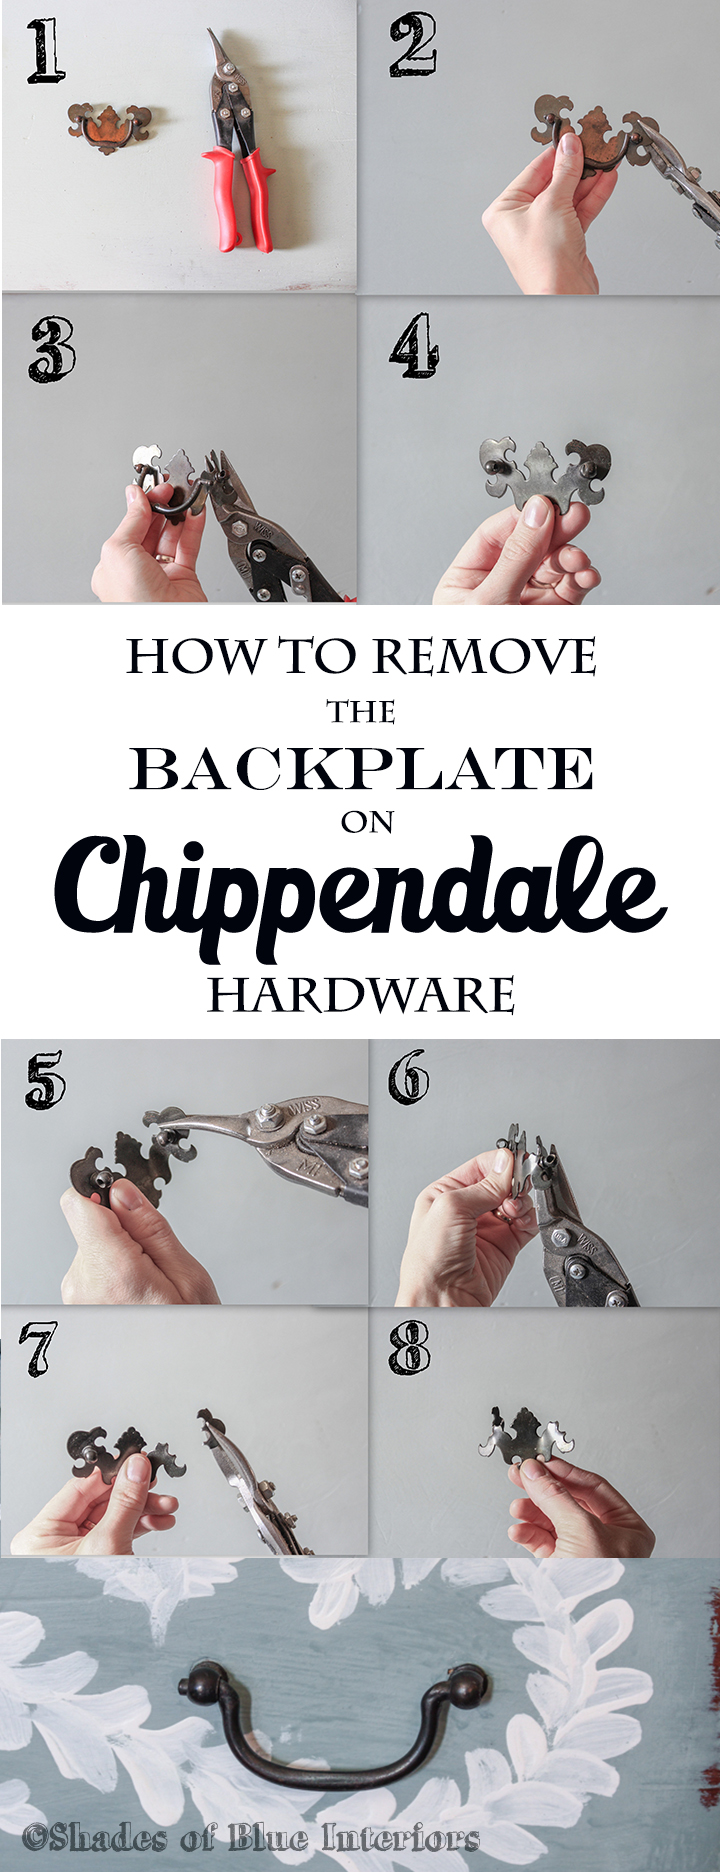 How to Remove Backplate on Chippendale Hardware